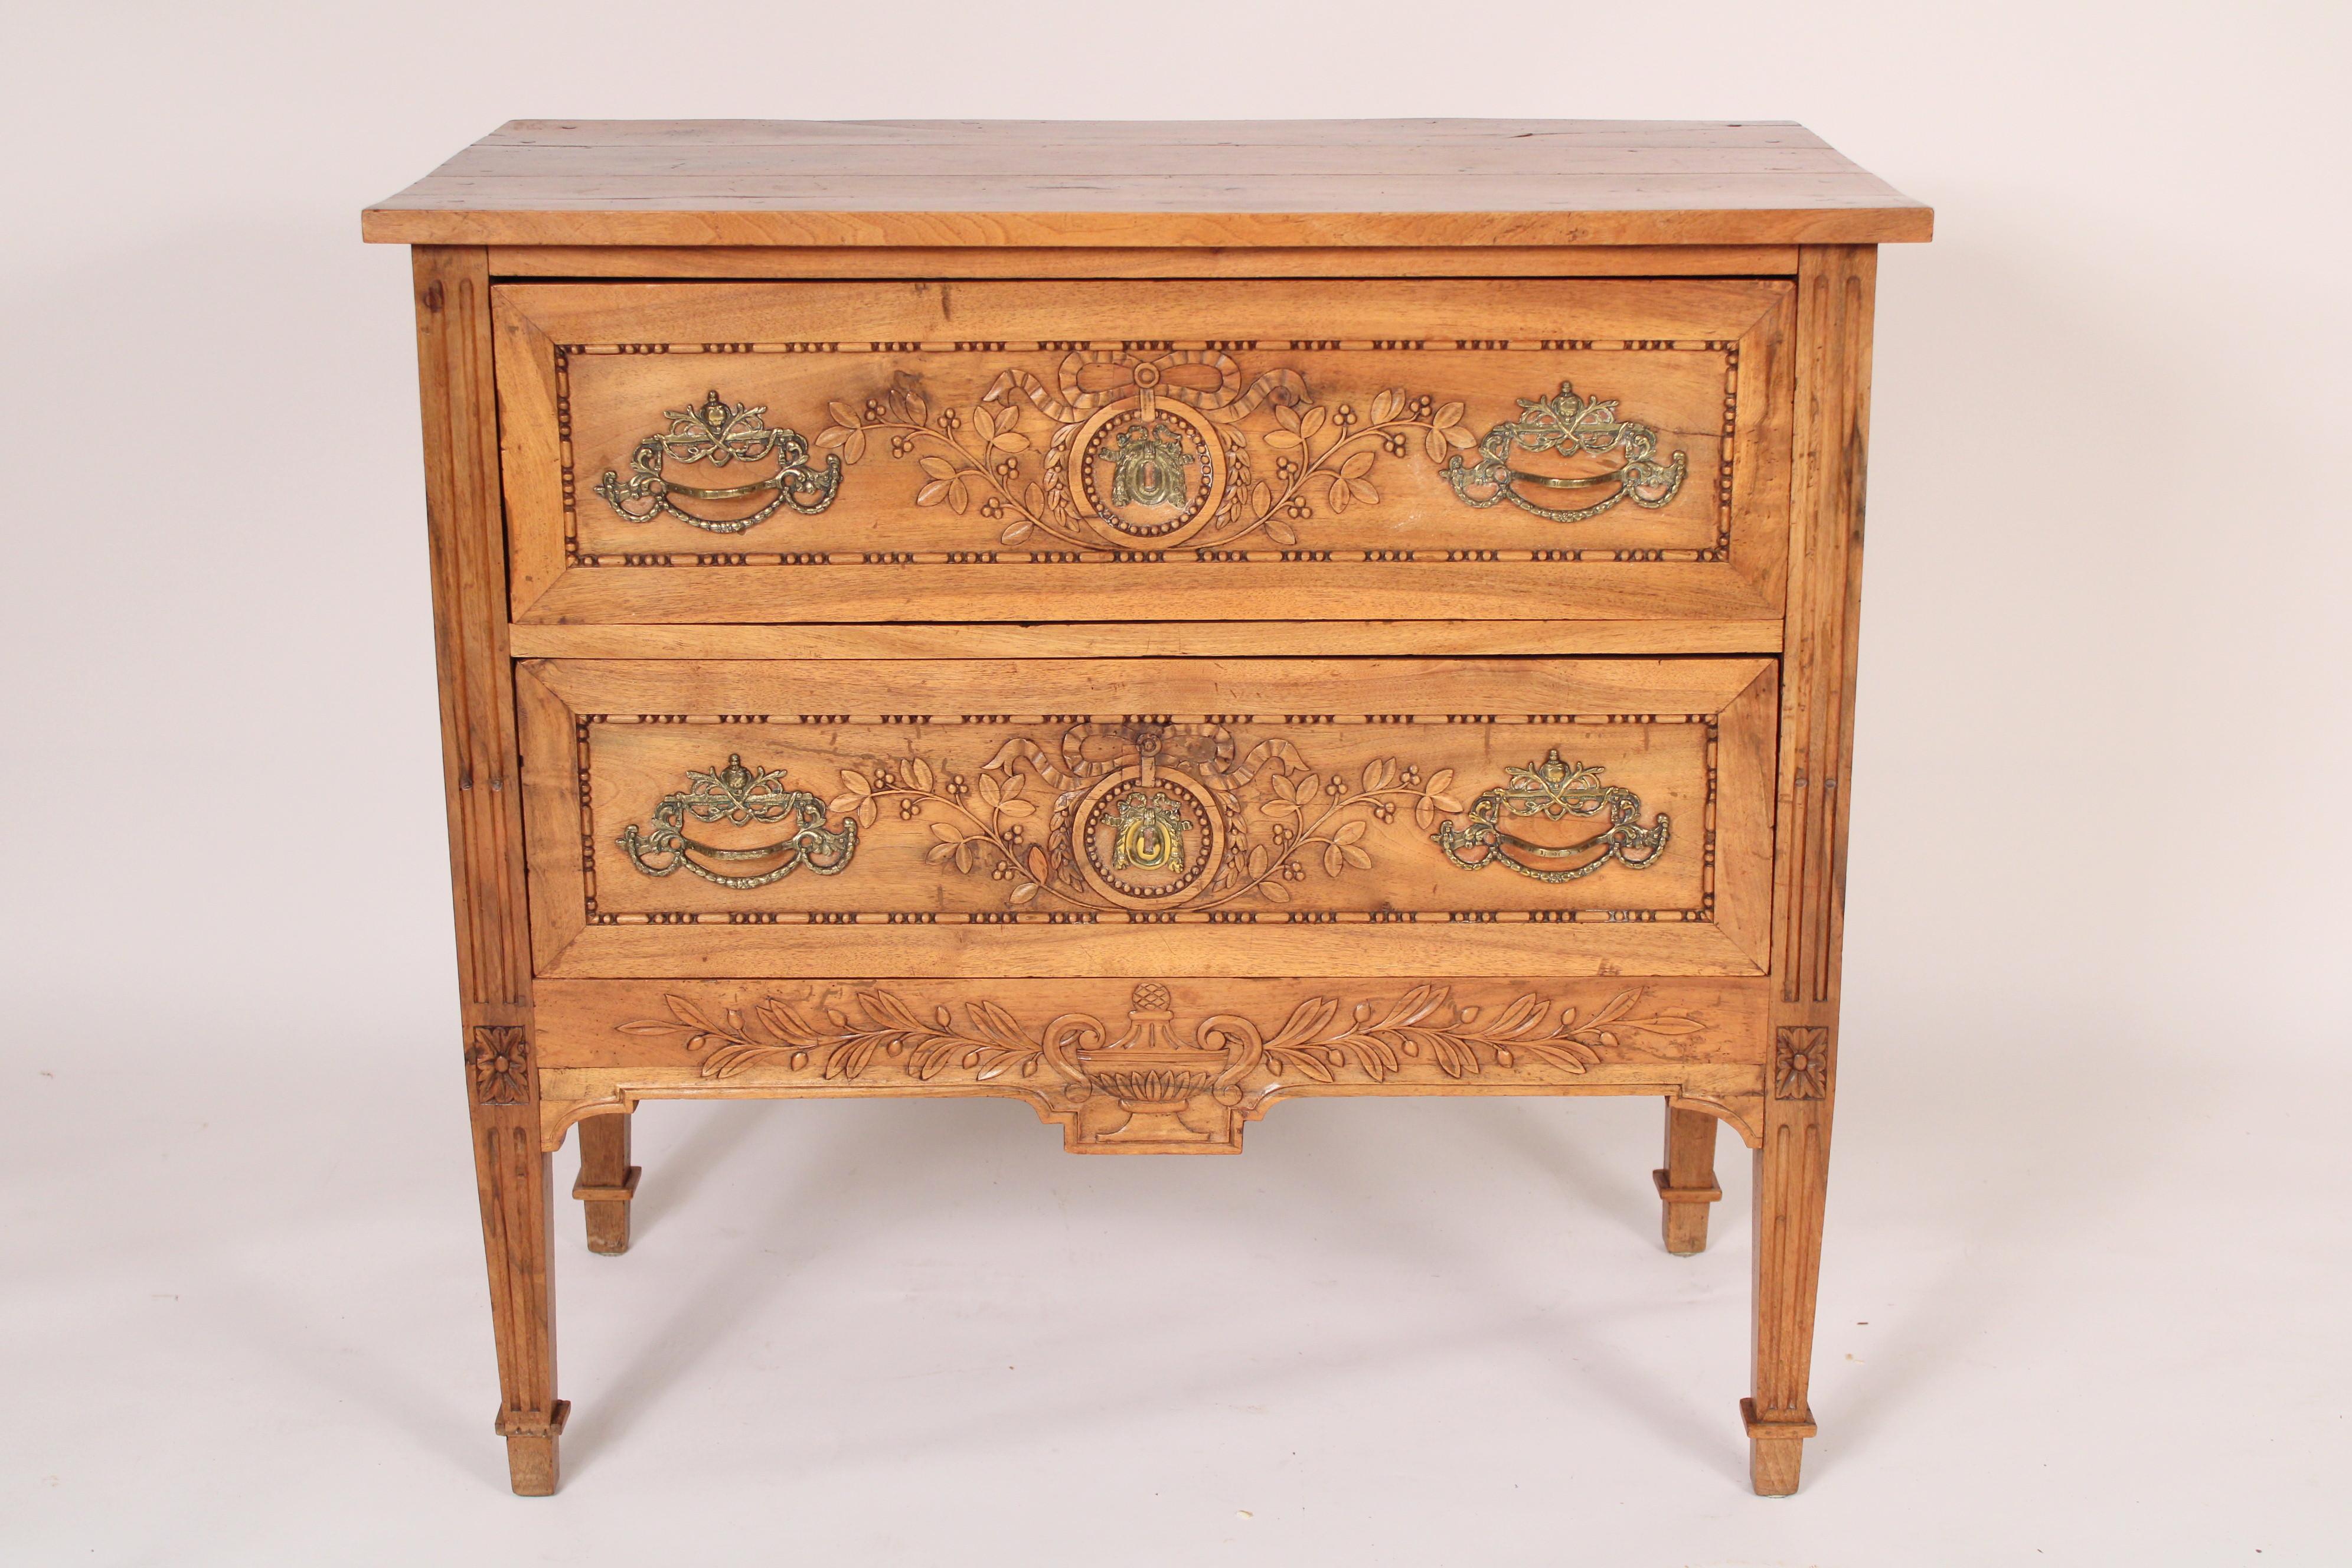 Antique Louis XVI style walnut chest of drawers, 19th century. With a rectangular 3 board top, two ribbon and leaf carved drawers resting on square fluted tapered legs.